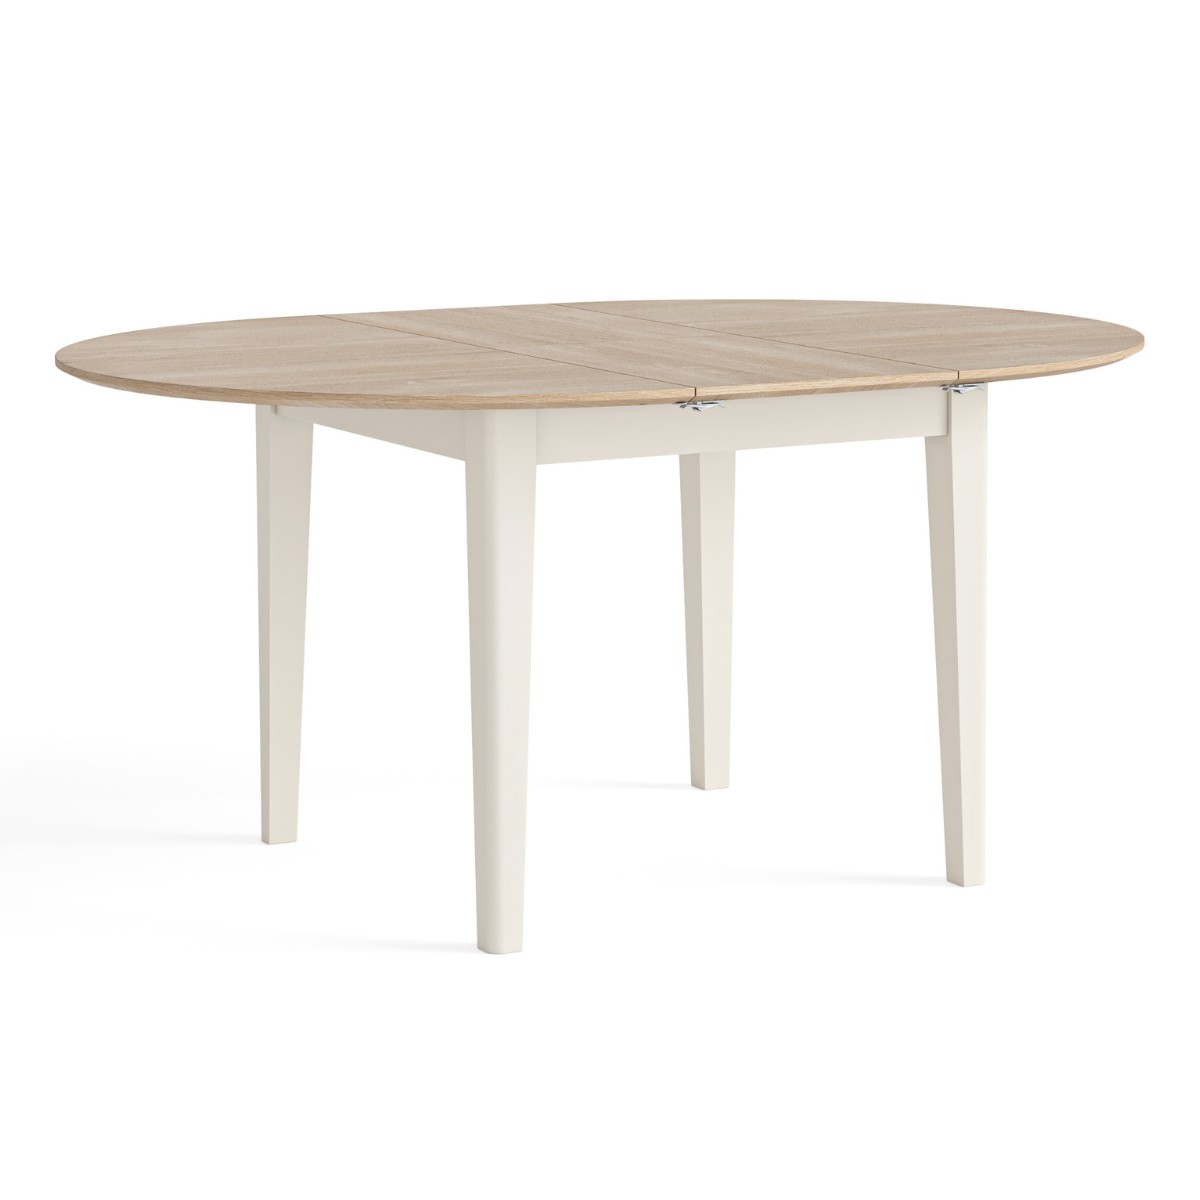 Marcella White Extendable Round Dining Table - 2